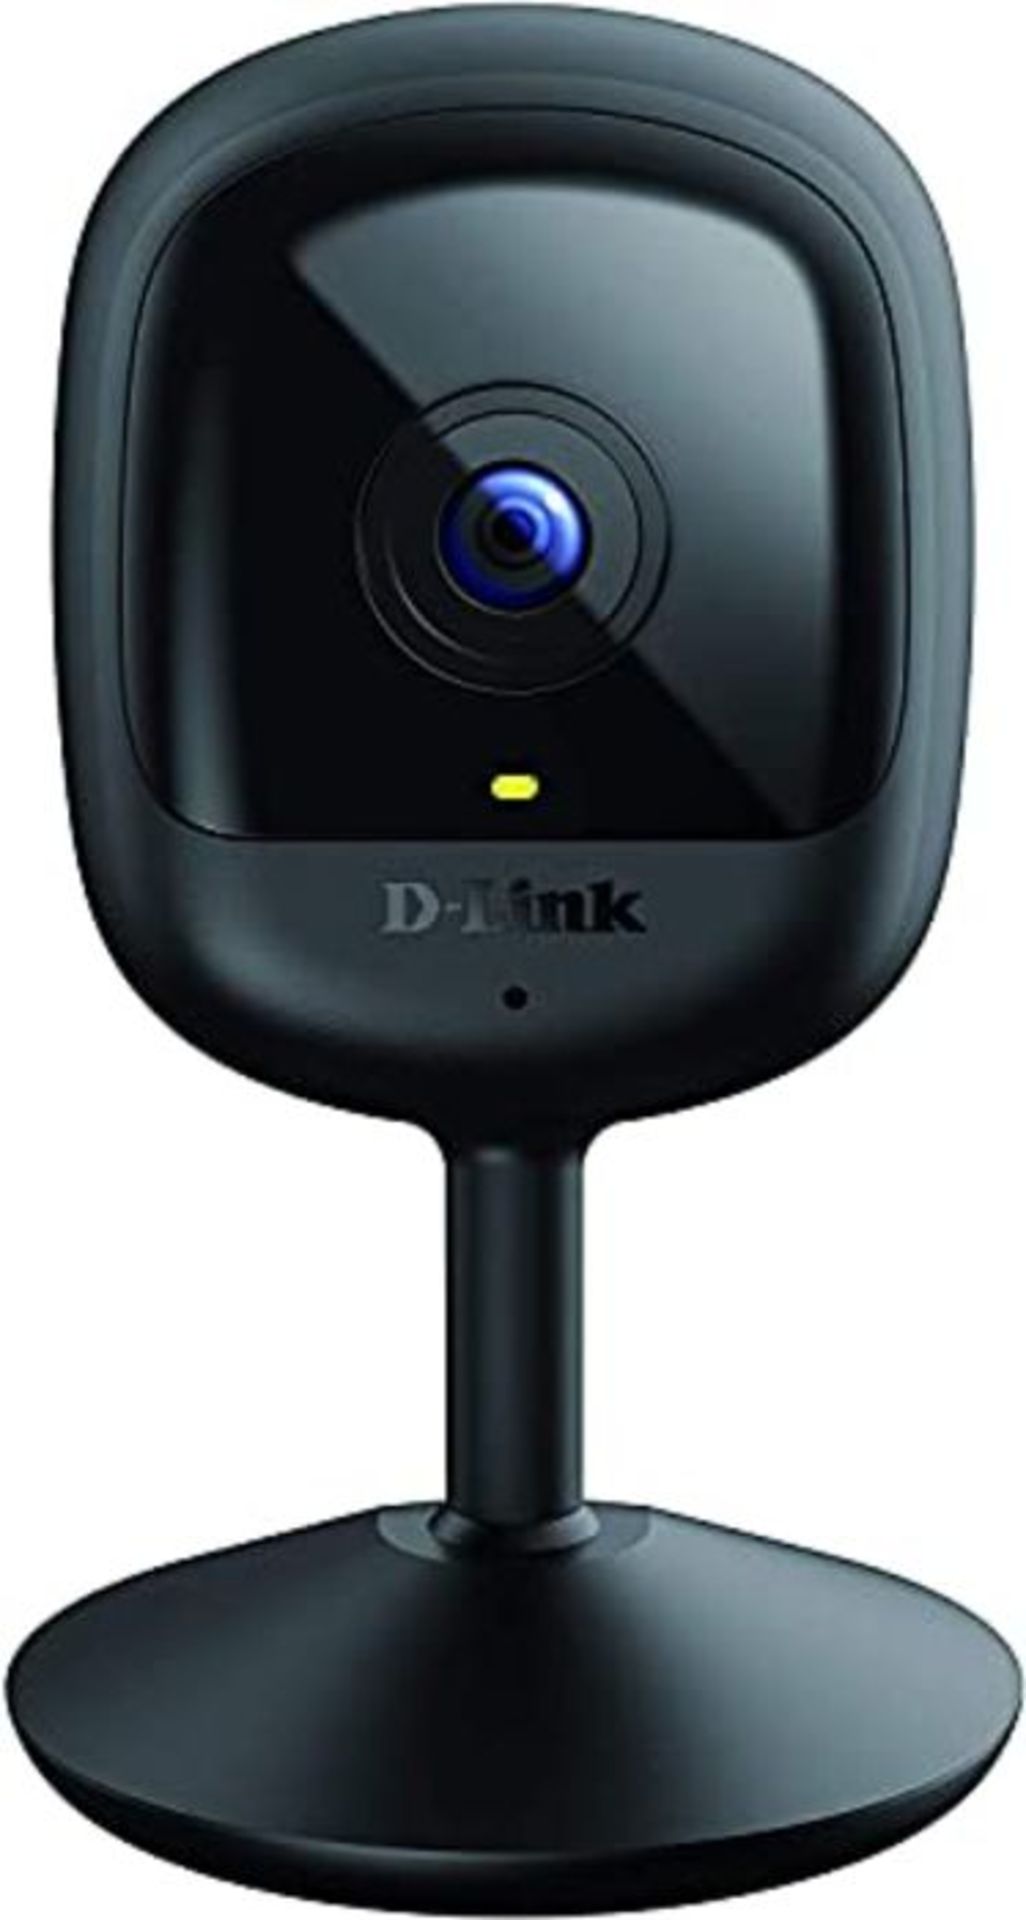 D-Link Compact FHD Wi-Fi Camera